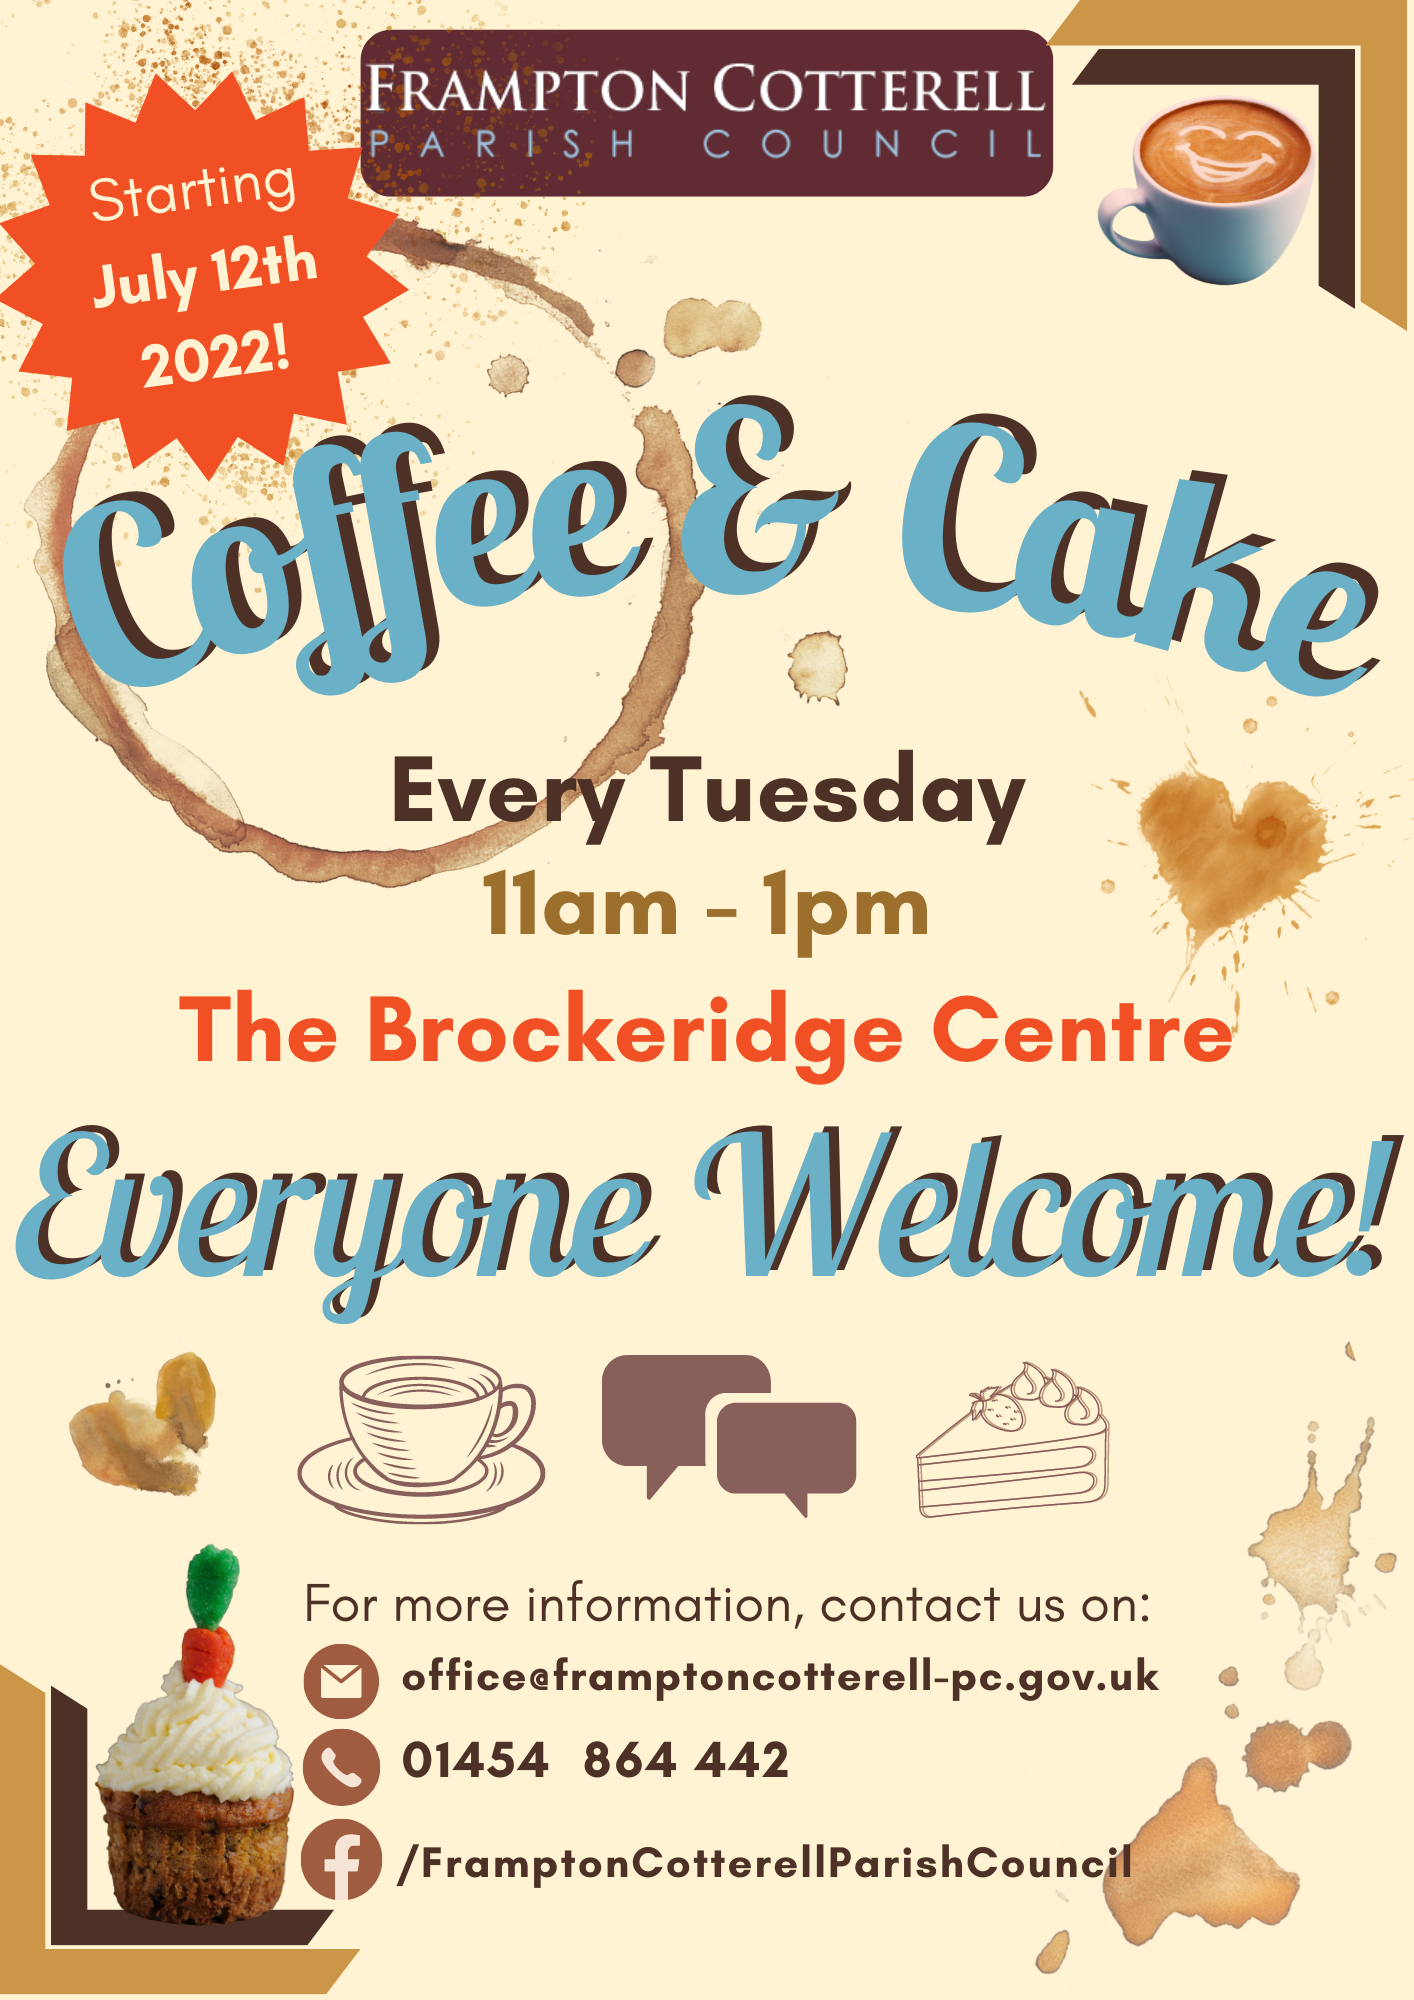 Frampton Cotterell Parish Council / Coffee & Cake / Starting July 12th 2022 / Every Tuesday / 11am - 1pm / The Brockeridge Centre / Everyone welcome / for more information contact us on: [email logo] office@framptoncotterell-pc.gov.uk, [phone logo] 01454 864 442, [facebook logo] /FramptonCotterellParishCouncil